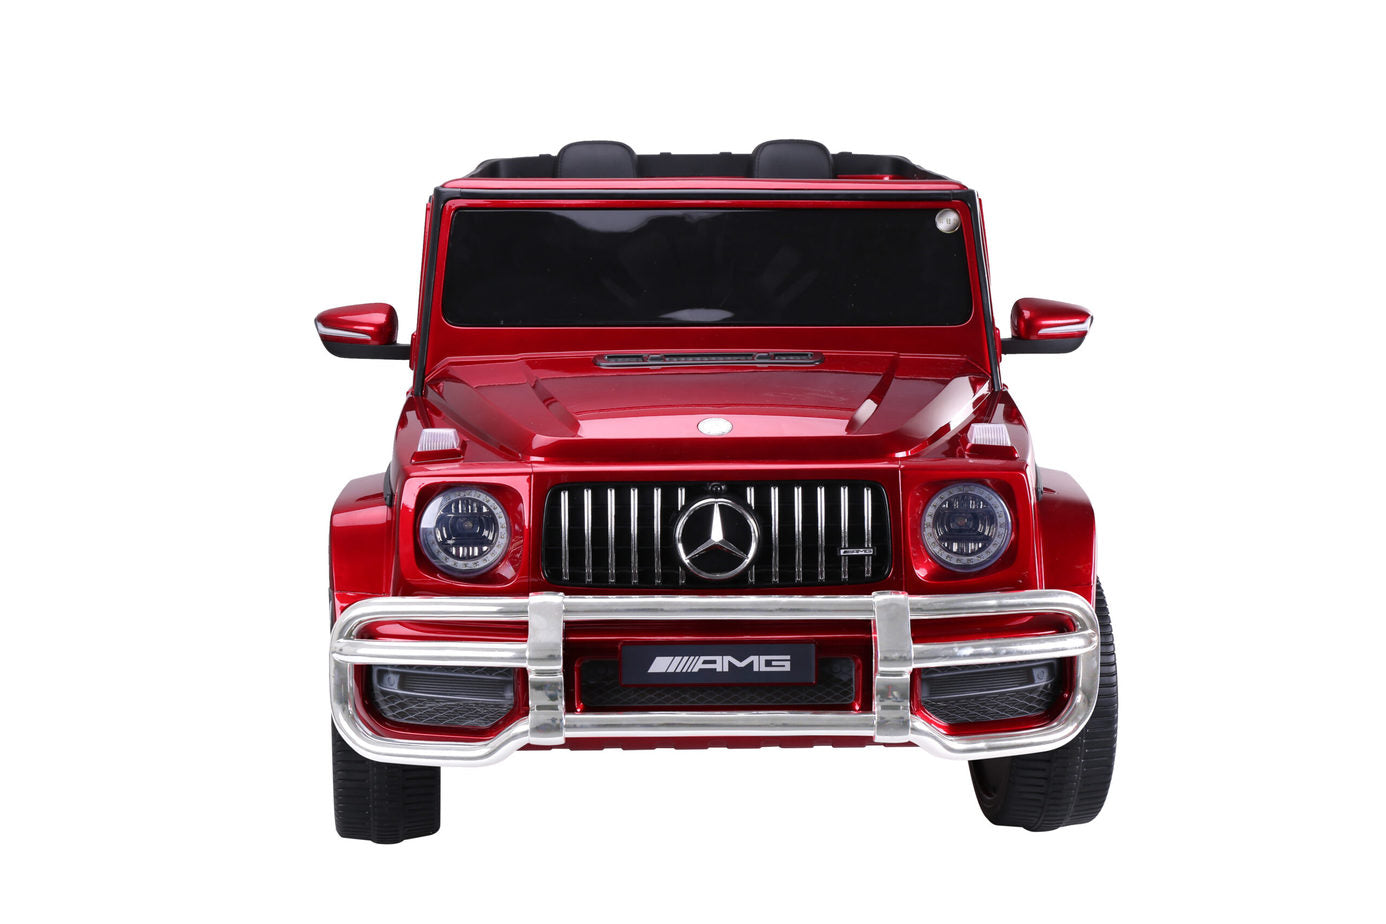 "Red Mercedes G-Wagon AMG G63 2 seater electric ride on jeep on white background."